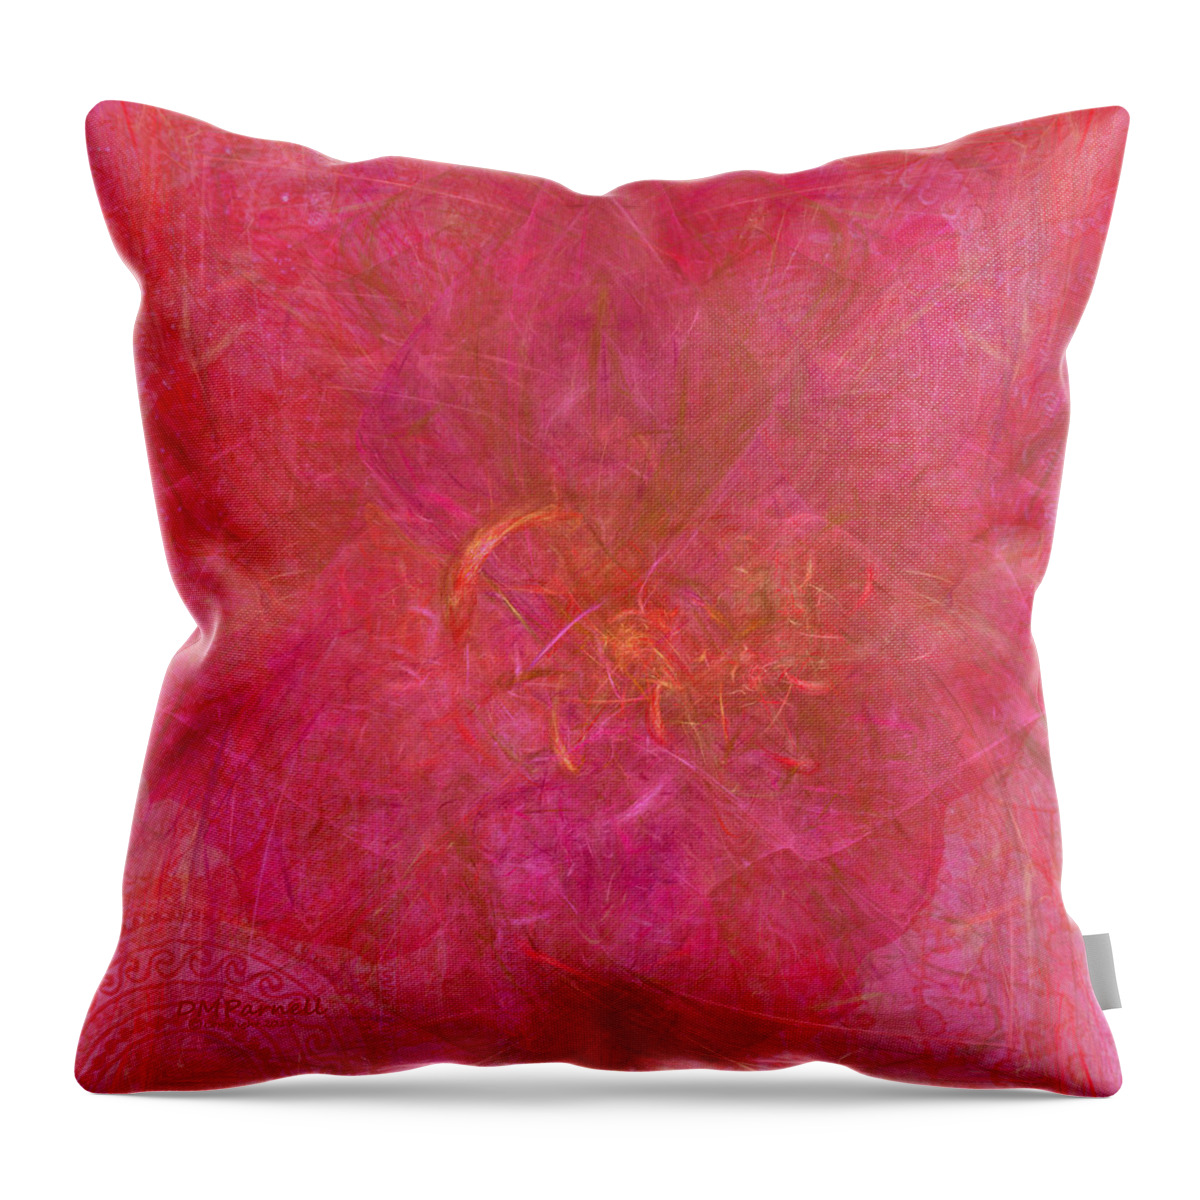 Flowers Throw Pillow featuring the digital art Dreams of Persian Flowers by Diane Parnell